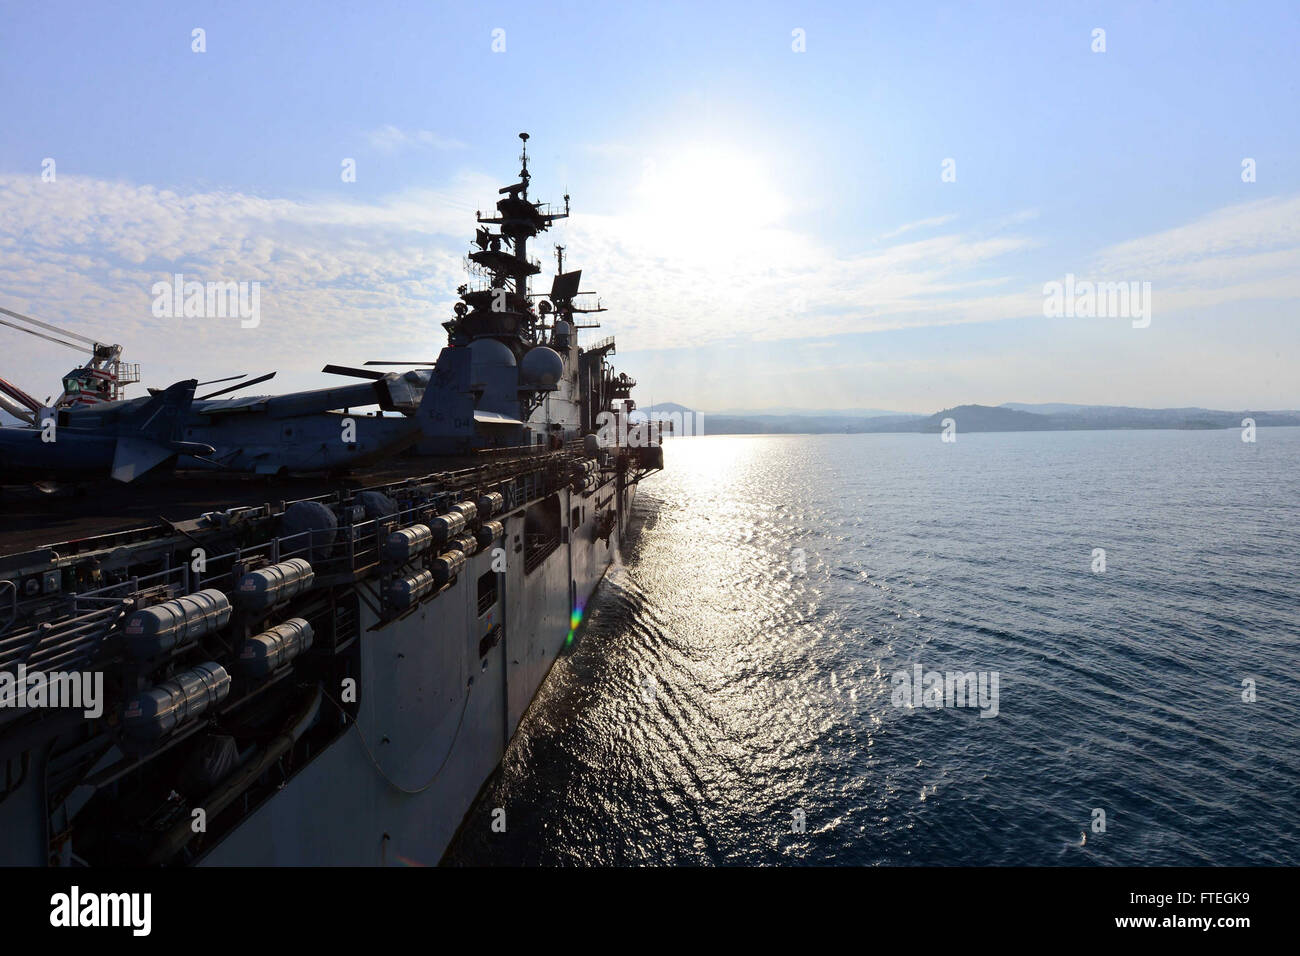 KUSADASI, Turkey (Oct. 4, 2014)  - The amphibious assault ship USS Bataan (LHD 5) arrives in Kusadasi, Turkey for a liberty port. The Bataan Amphibious Ready Group is on a scheduled deployment supporting maritime security operations, providing crisis response capability and theater security cooperation efforts in the U.S. 6th Fleet area of operations. Stock Photo